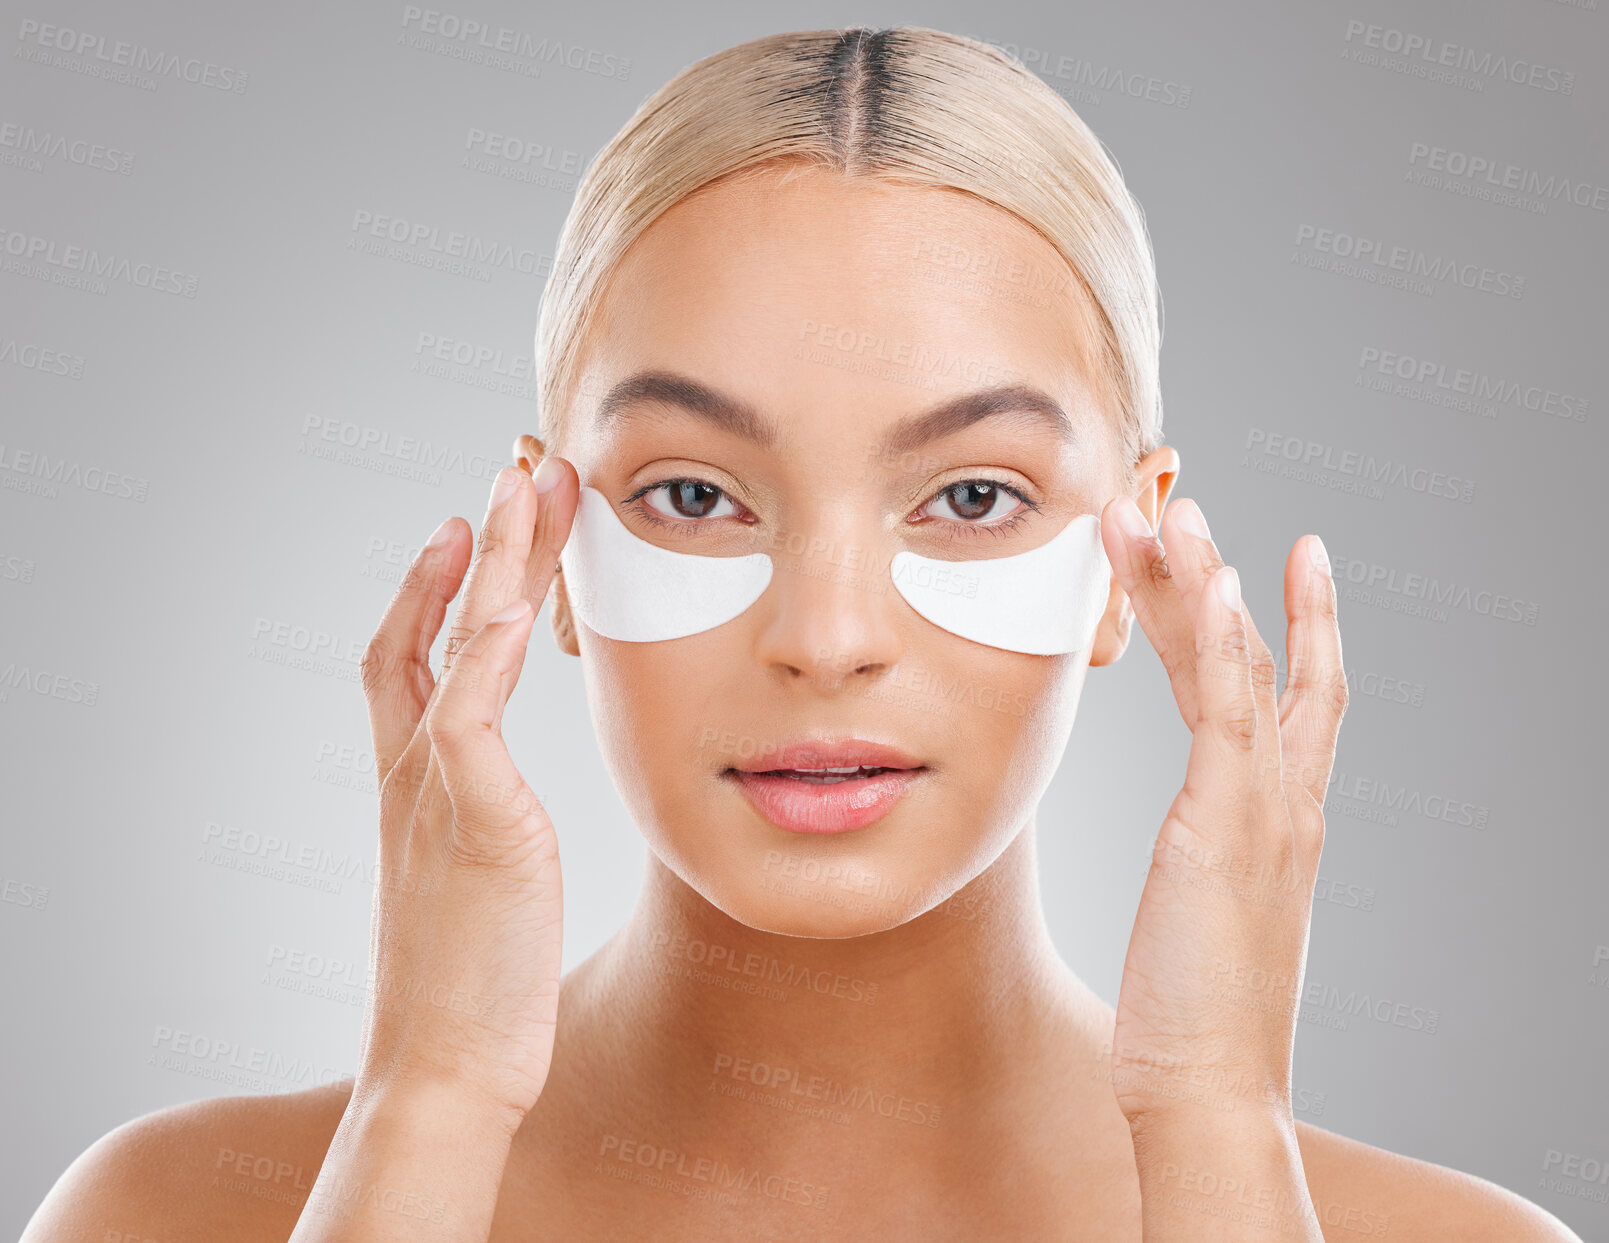 Buy stock photo Shot of an attractive young woman wearing an under eye patch against a studio background